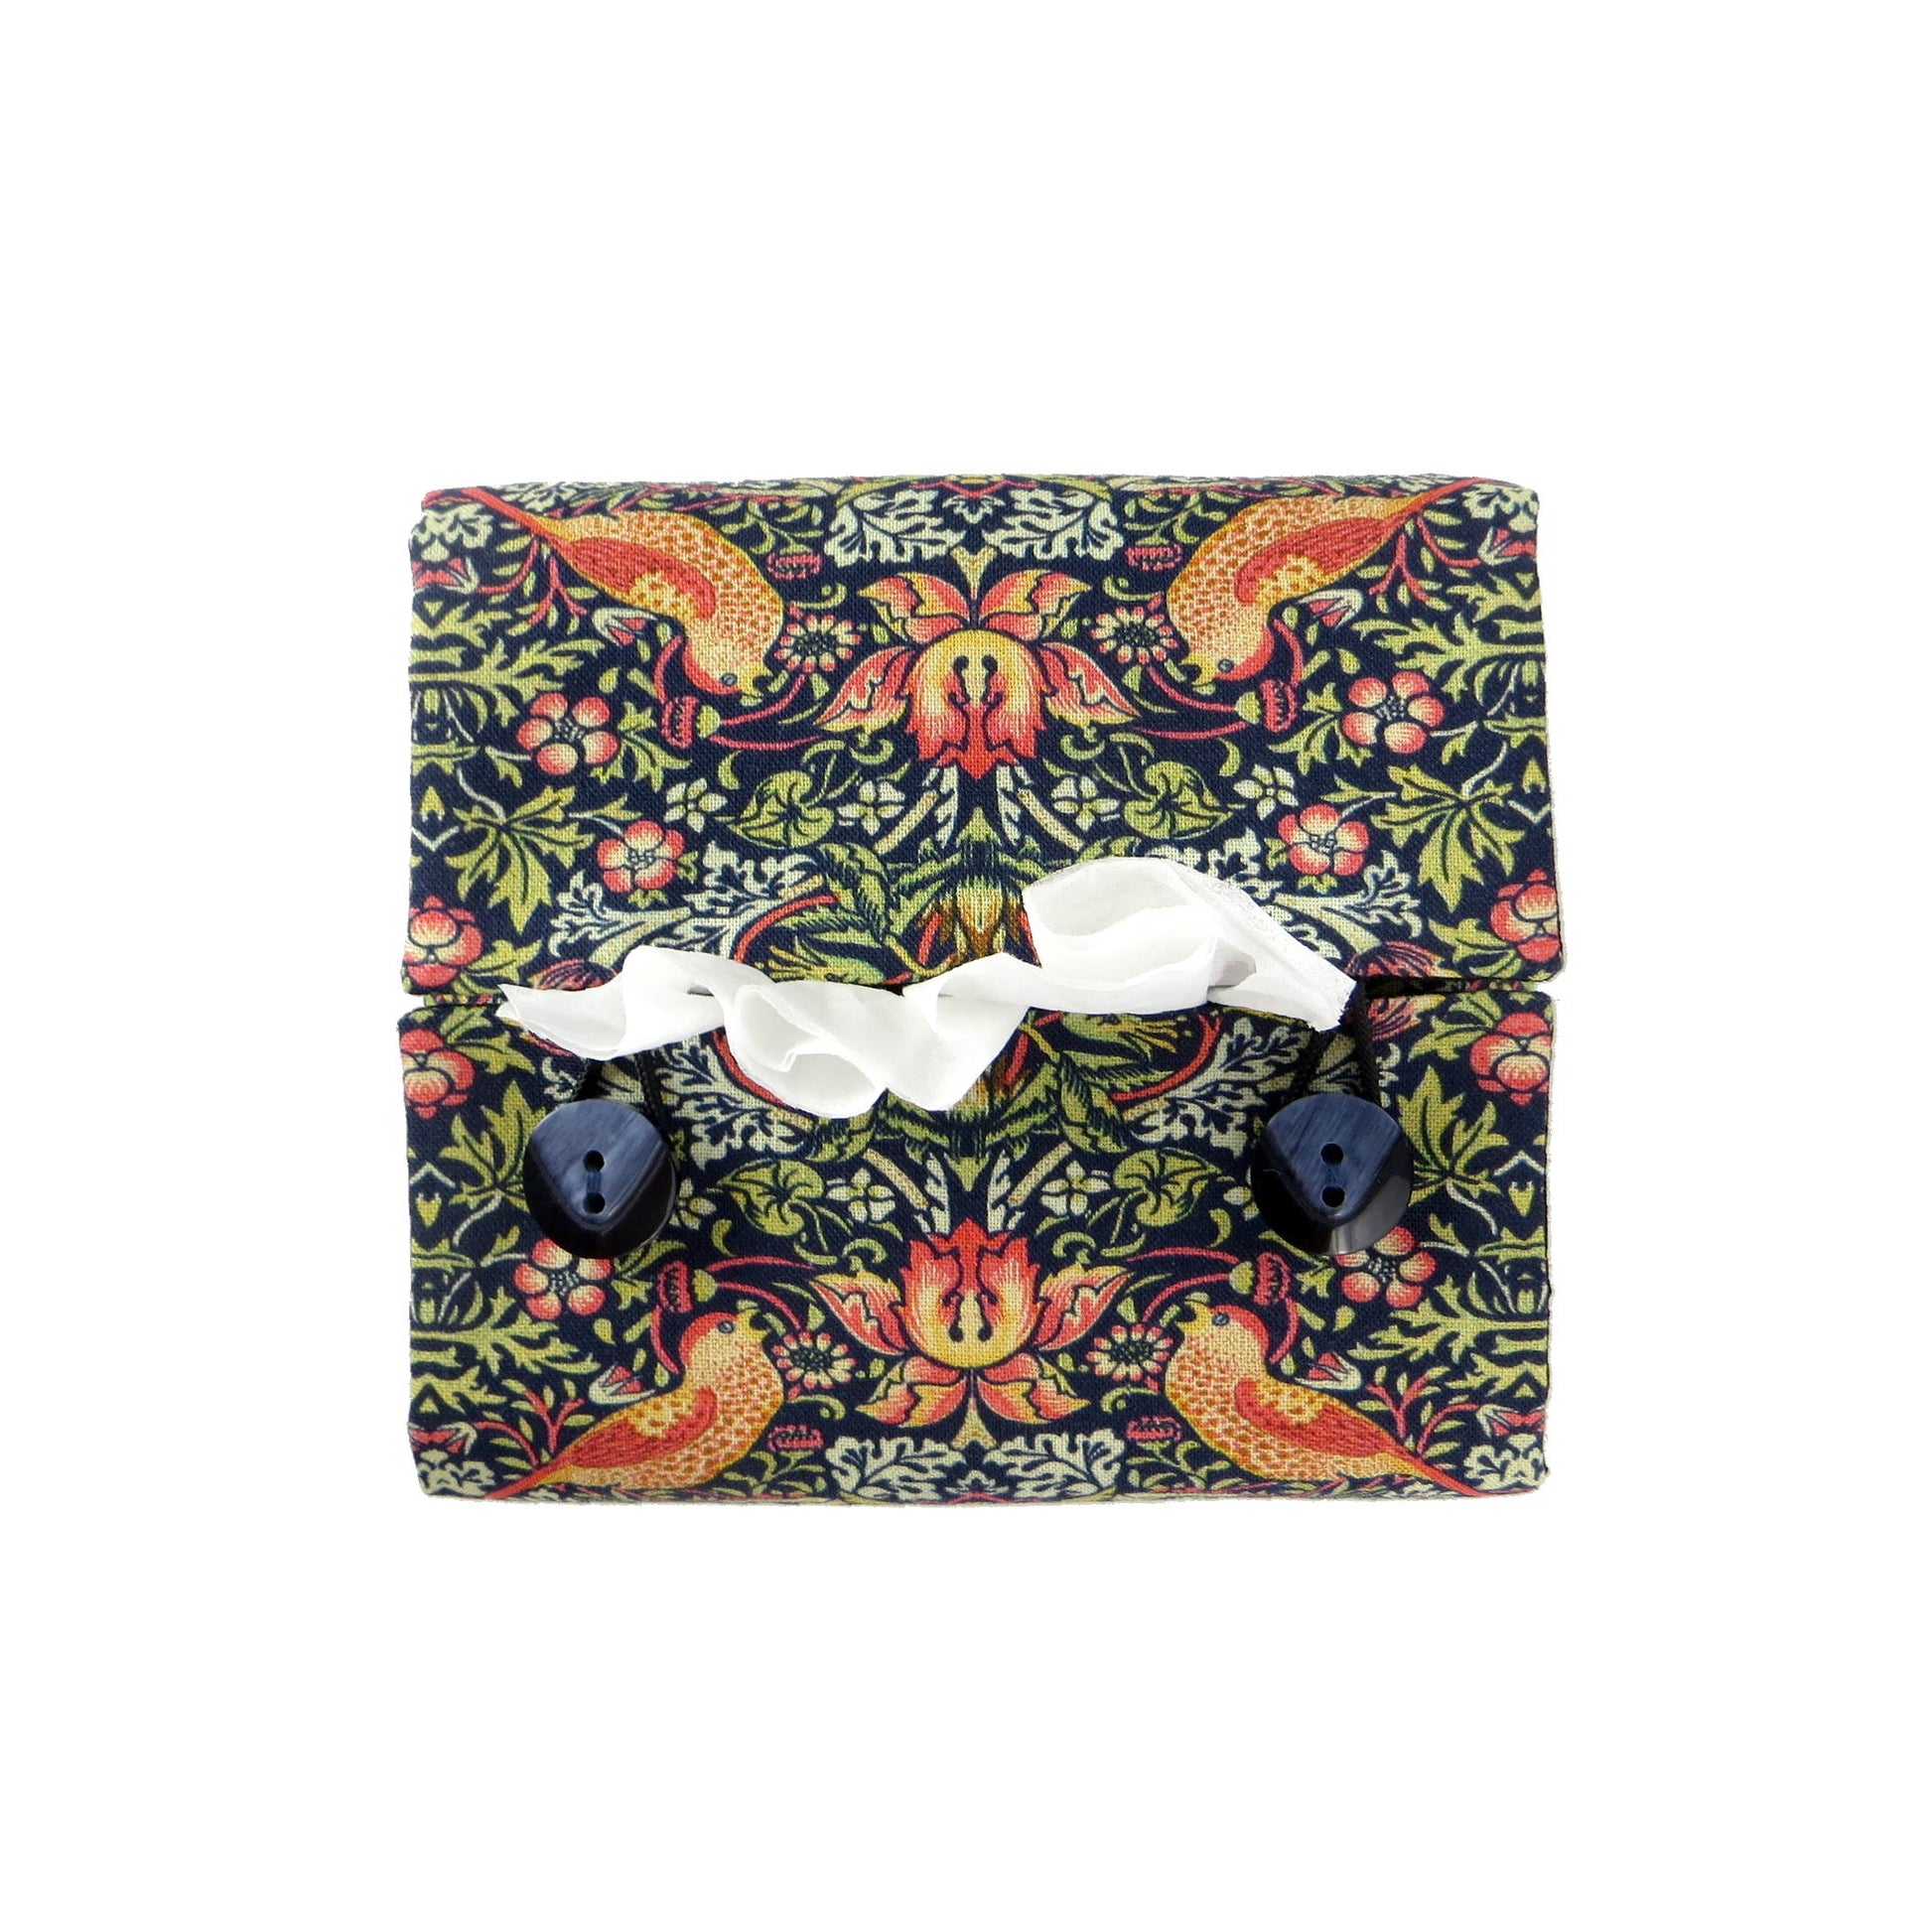 Square tissue box cover with birds and berries design on dark blue background